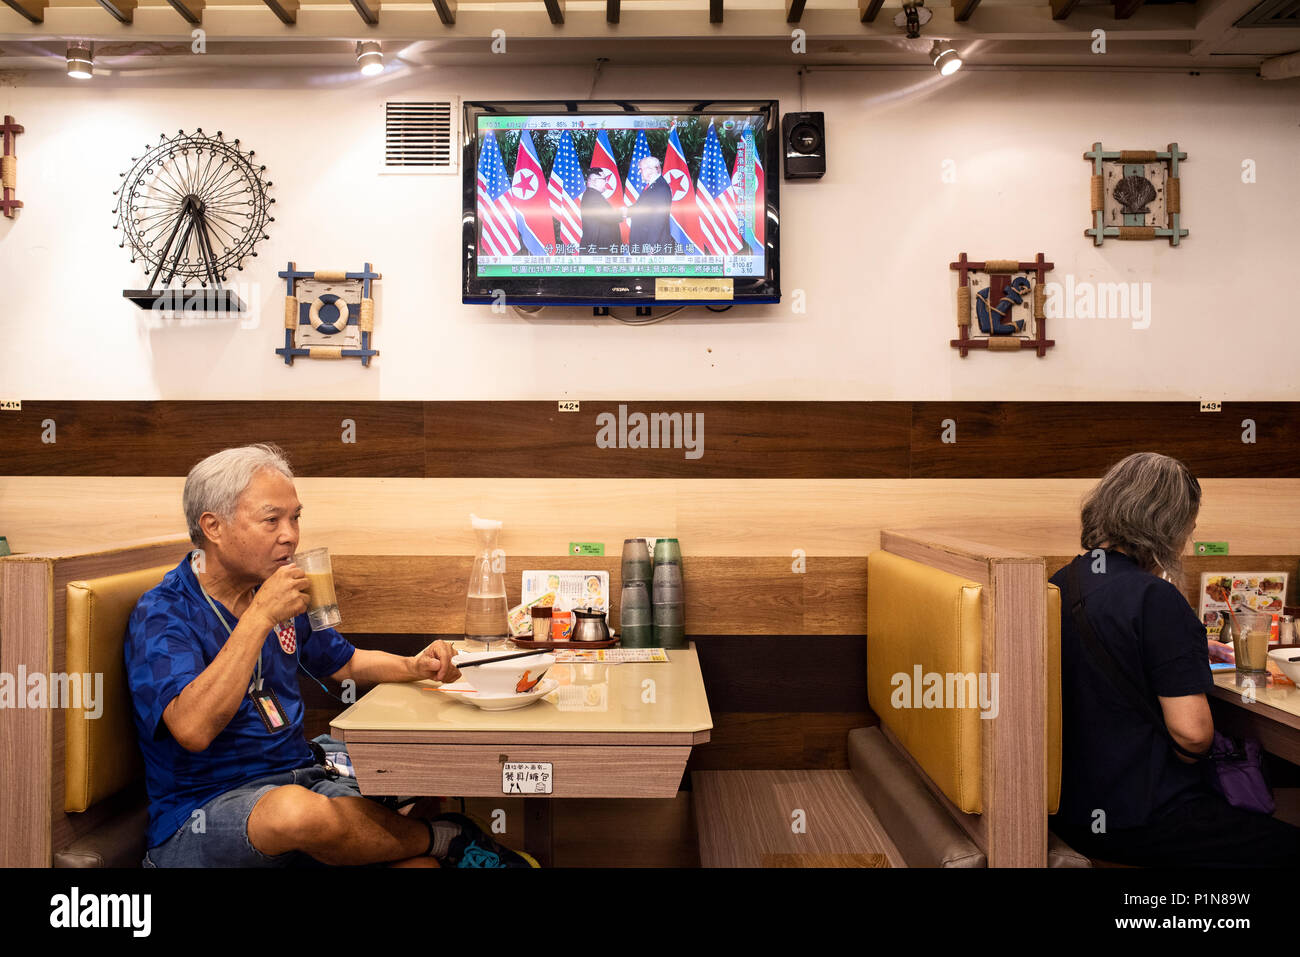 At a local restaurant in Hong Kong, a local watches a TV screen showing the historic moment when US President Donald Trump and North Korea leader Kim Jong-un meet for the first time during the Singapore peace-keeping and denuclearisation Summit. Stock Photo